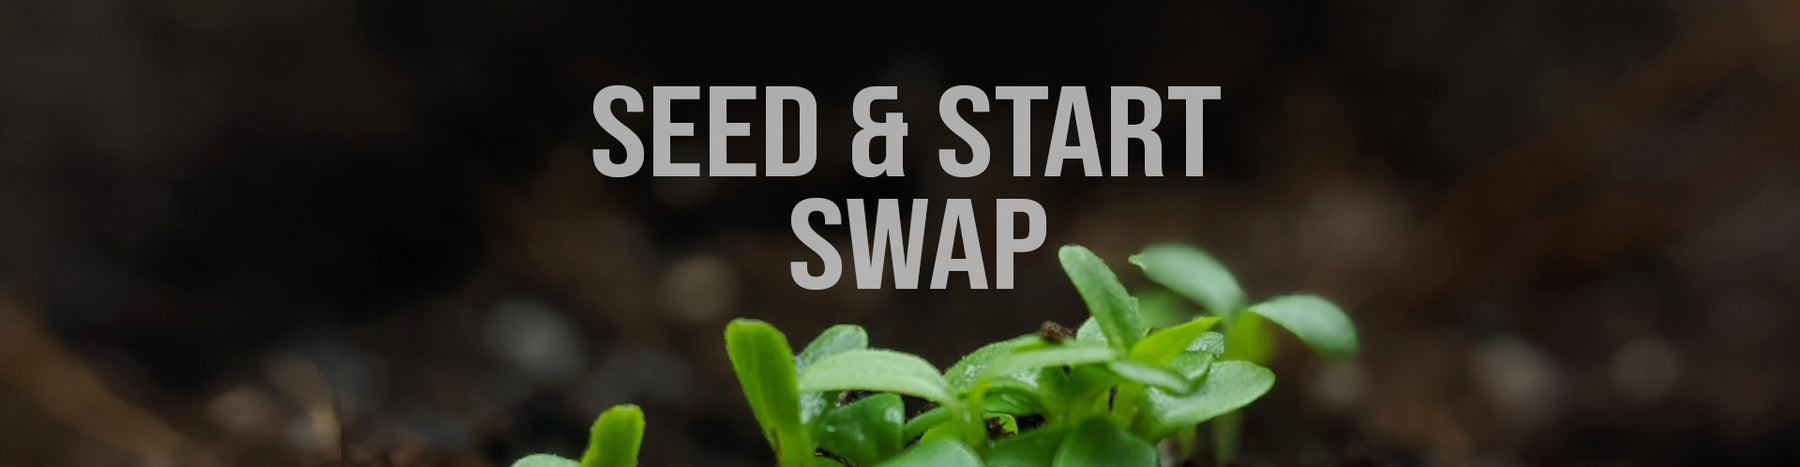 Seed and Start Swap with baby seedlings coming up from the soil